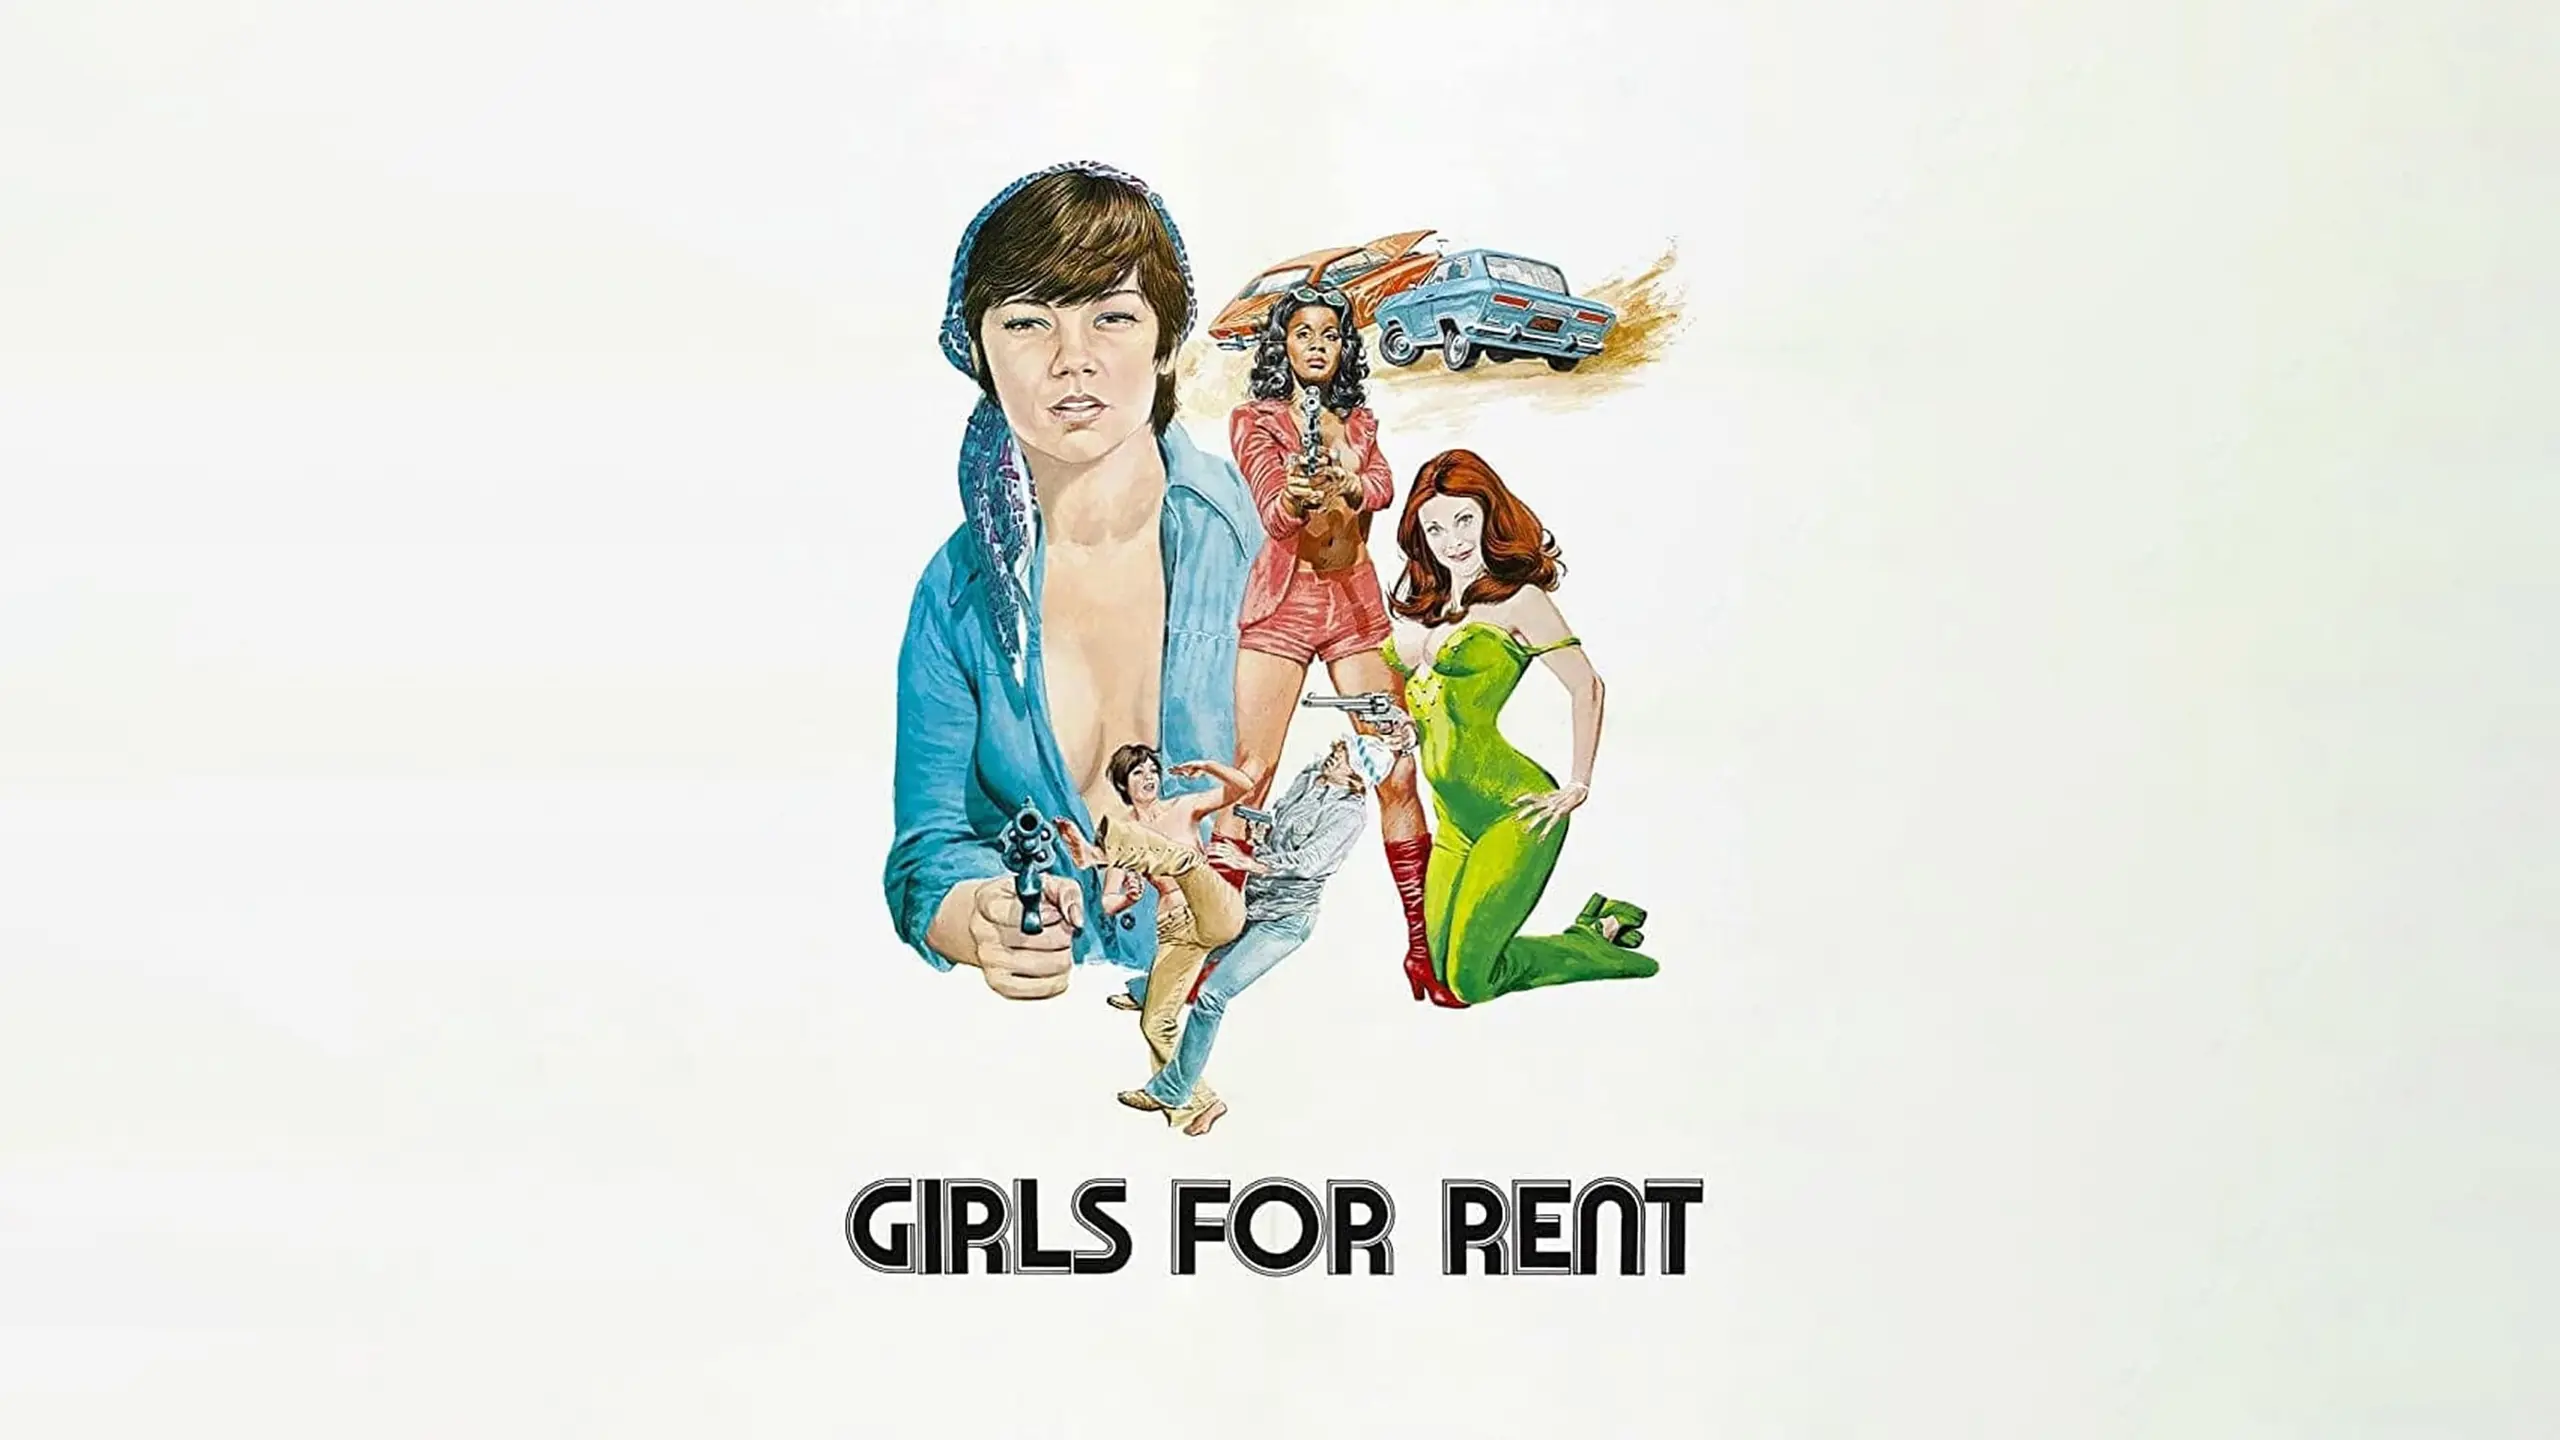 Girls for Rent